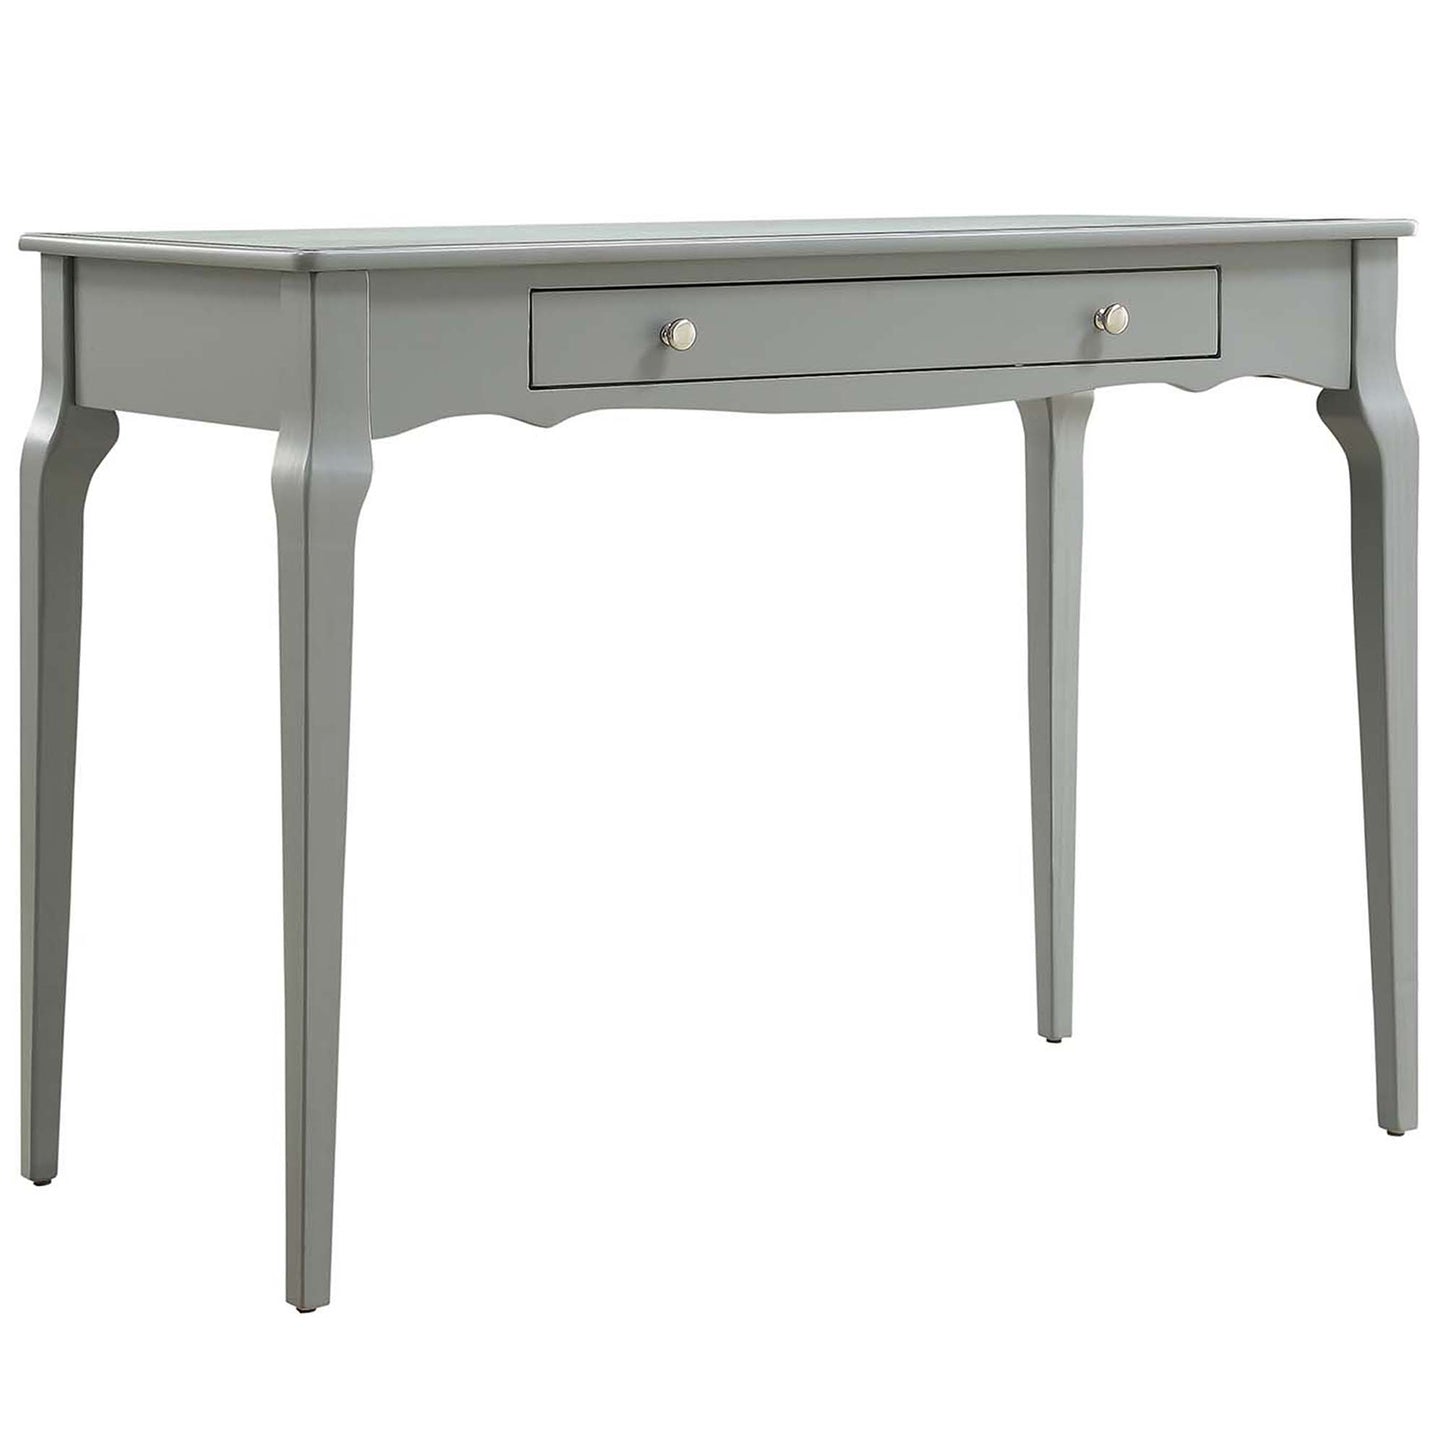 1-Drawer Wood Writing Desk - Frost Grey